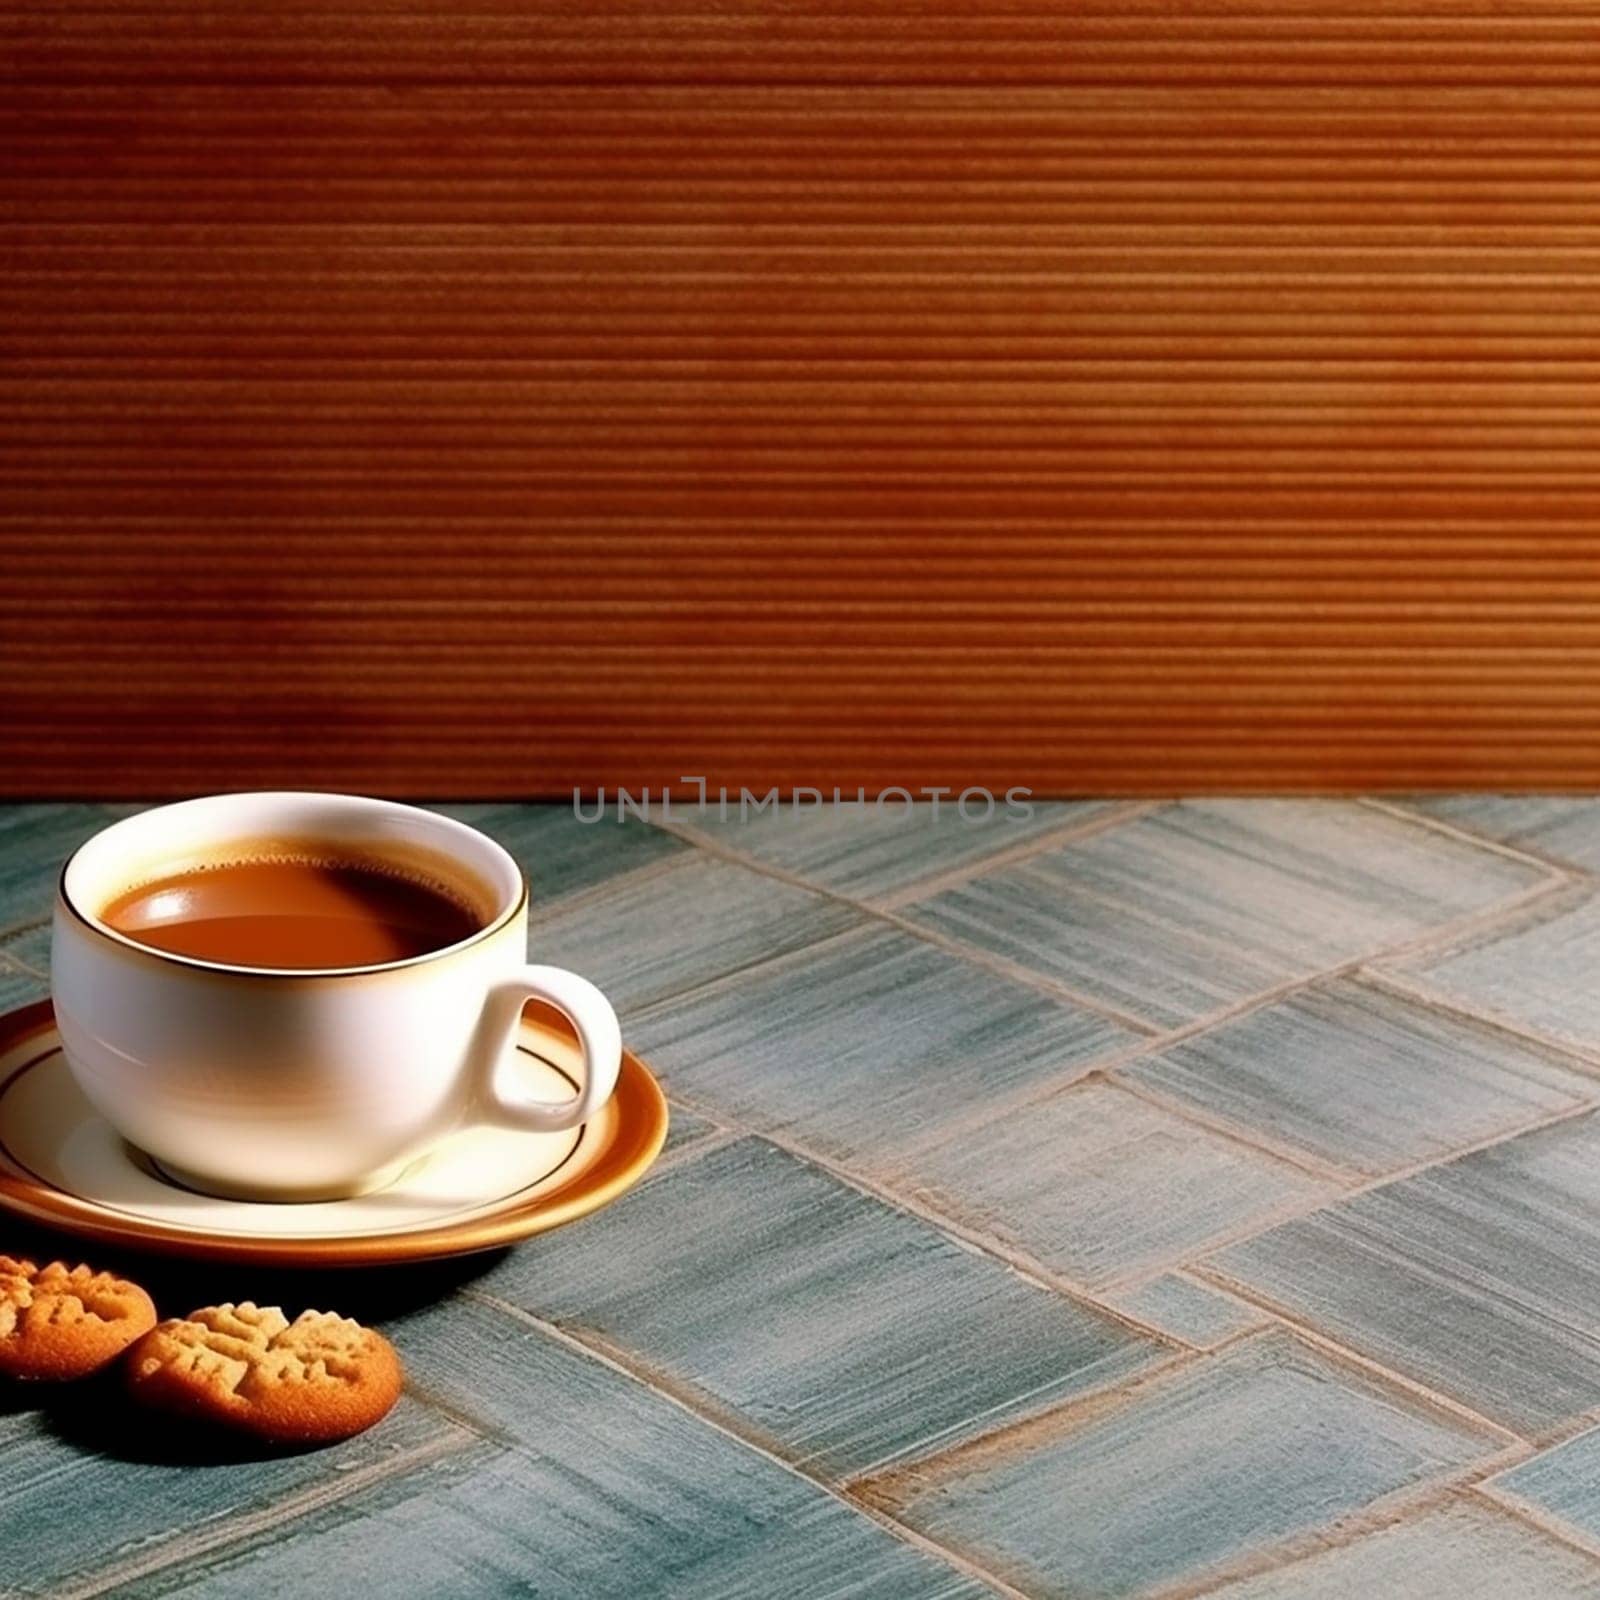 A cup of tea with biscuits on a tabletop.